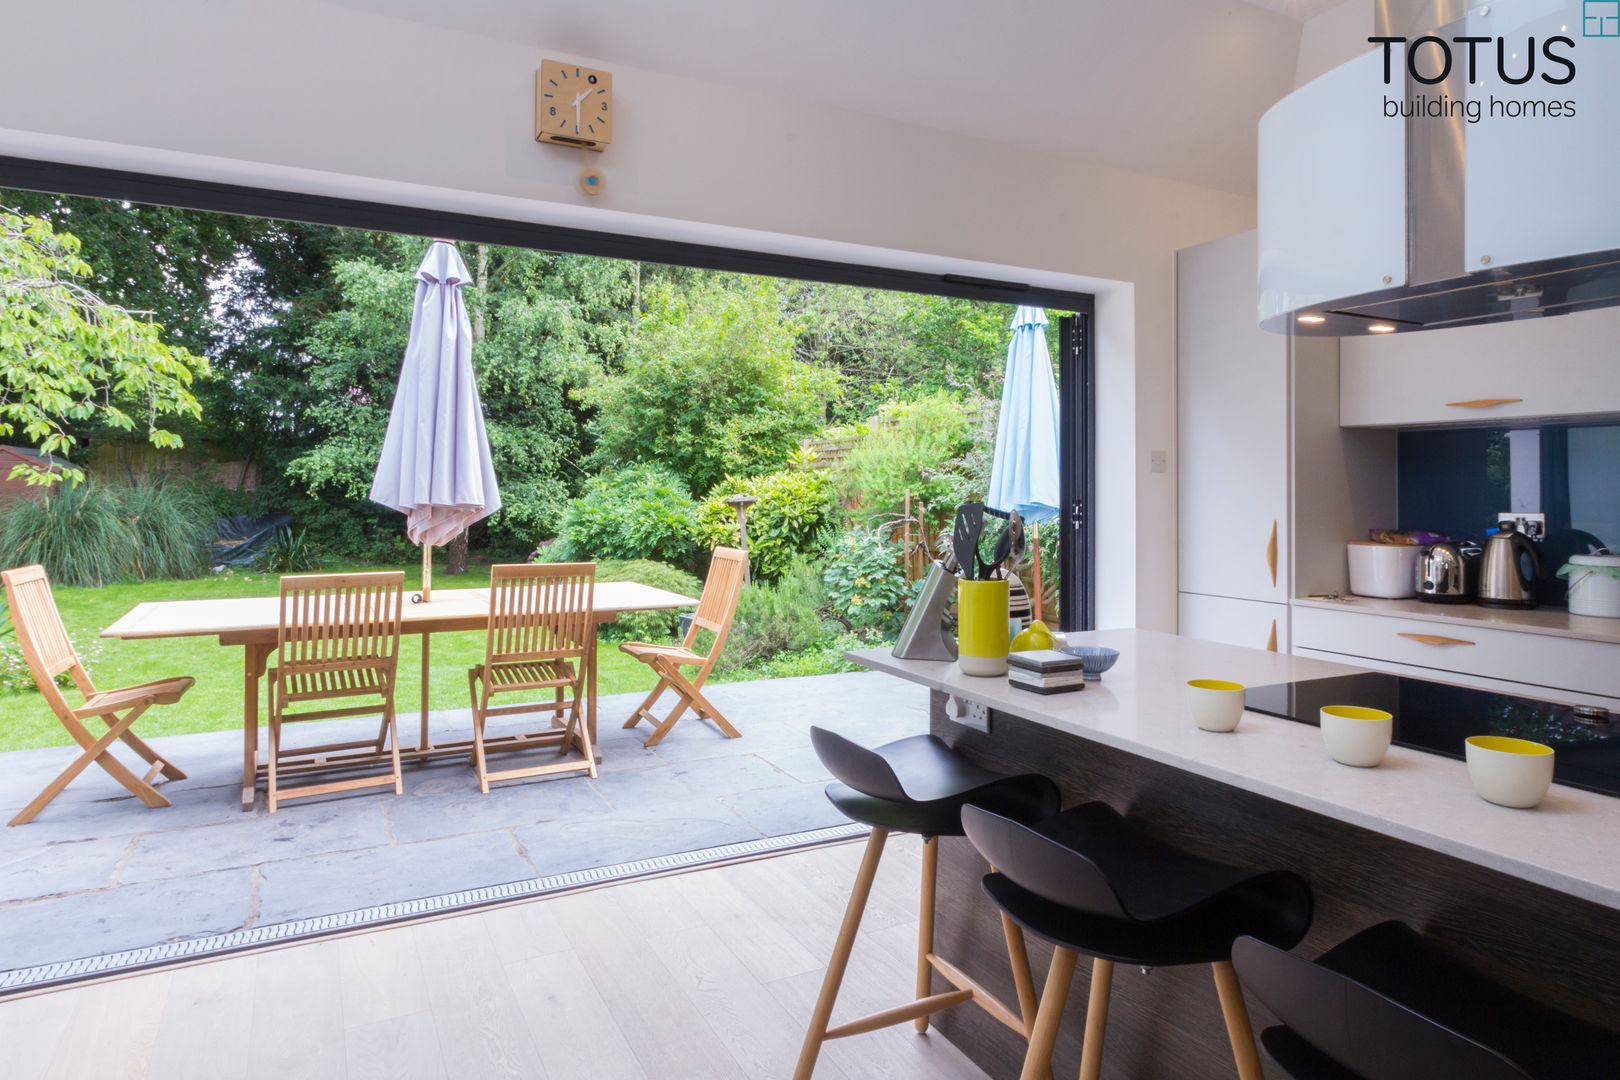 New life for a 1920s home - extension and full renovation, Thames Ditton, Surrey, TOTUS TOTUS Dapur Modern